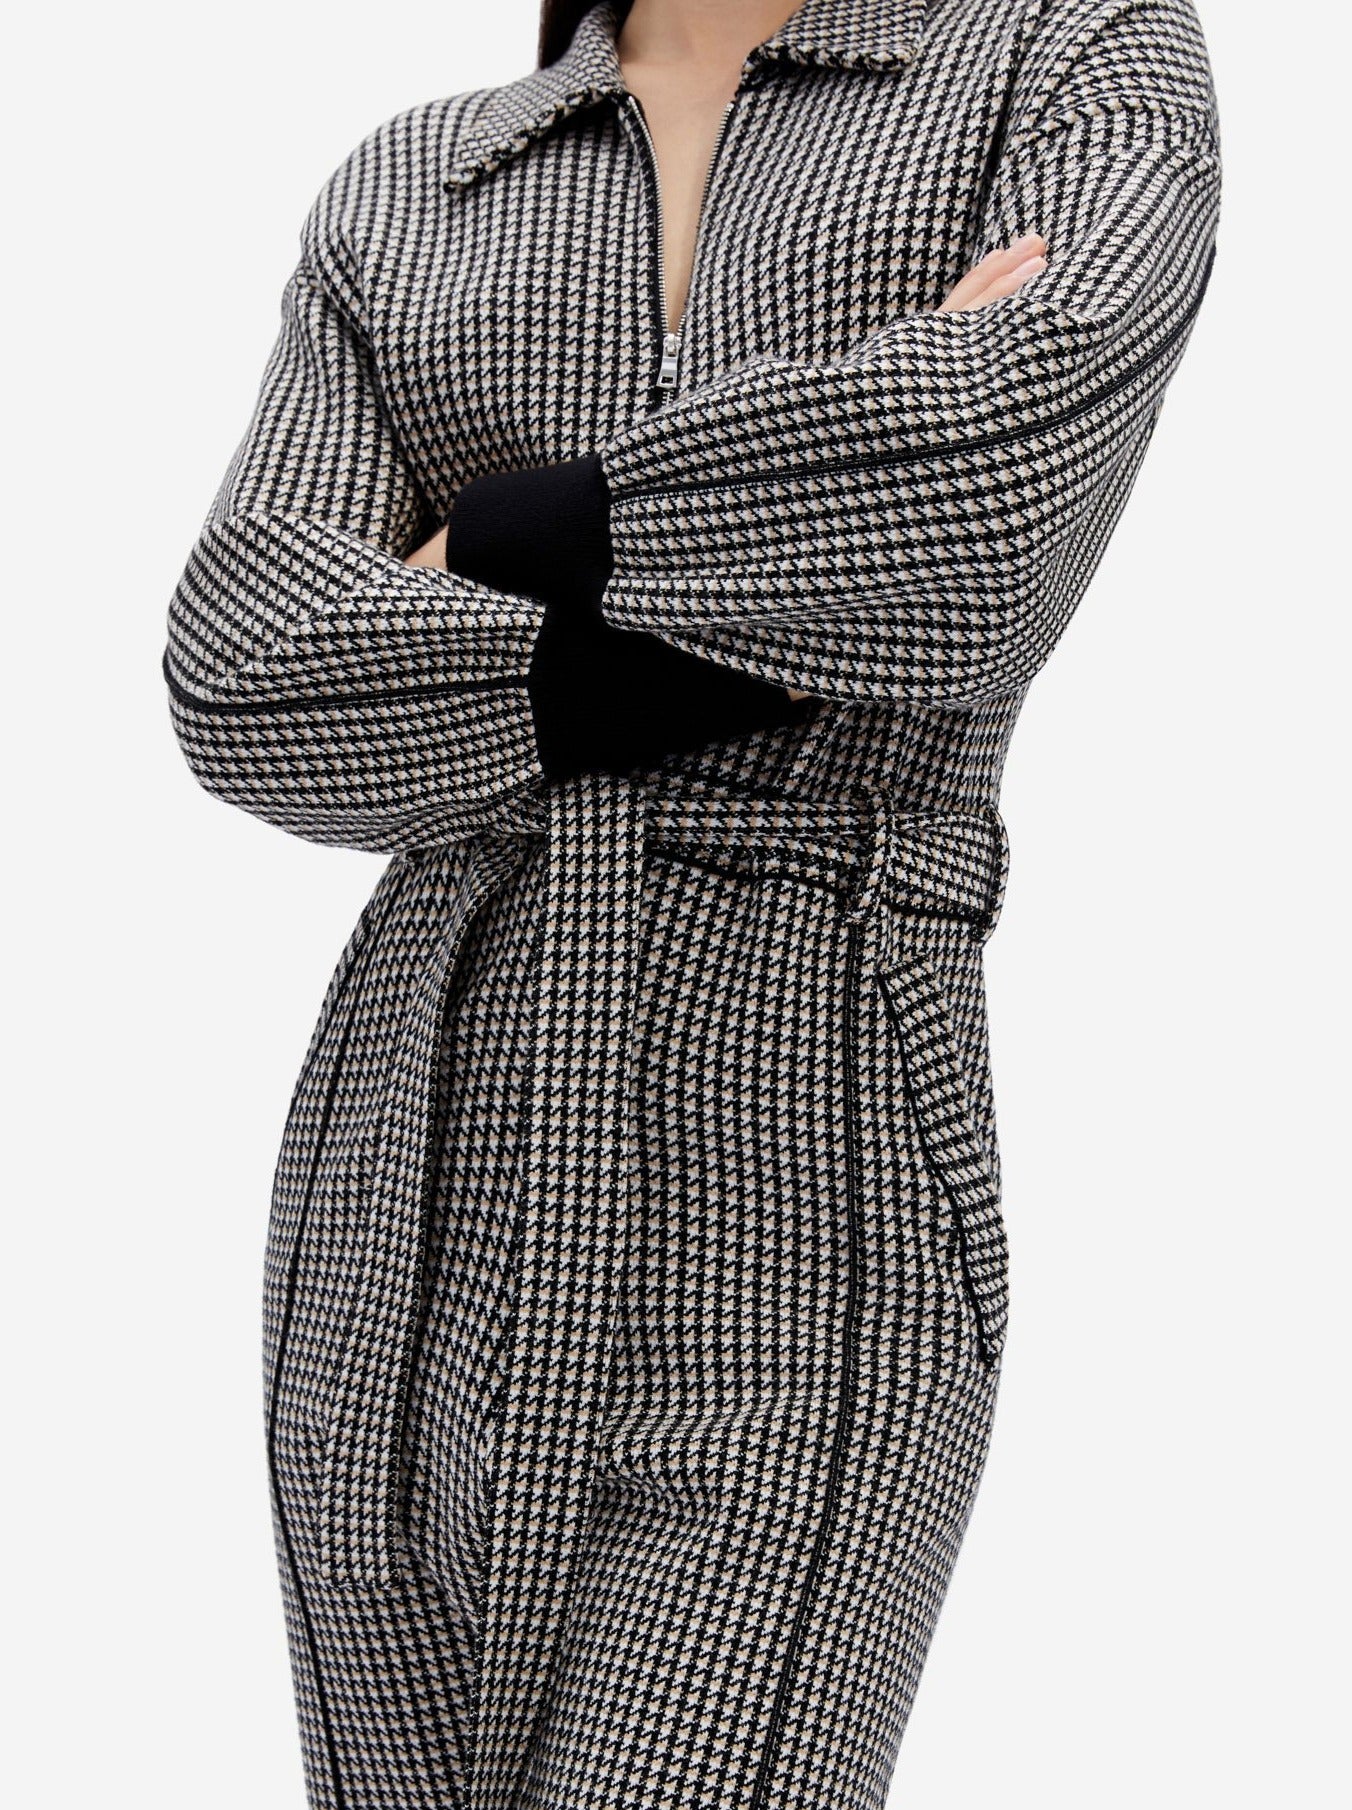 HOUNDSTOOTH ANNABELLE JUMPSUIT